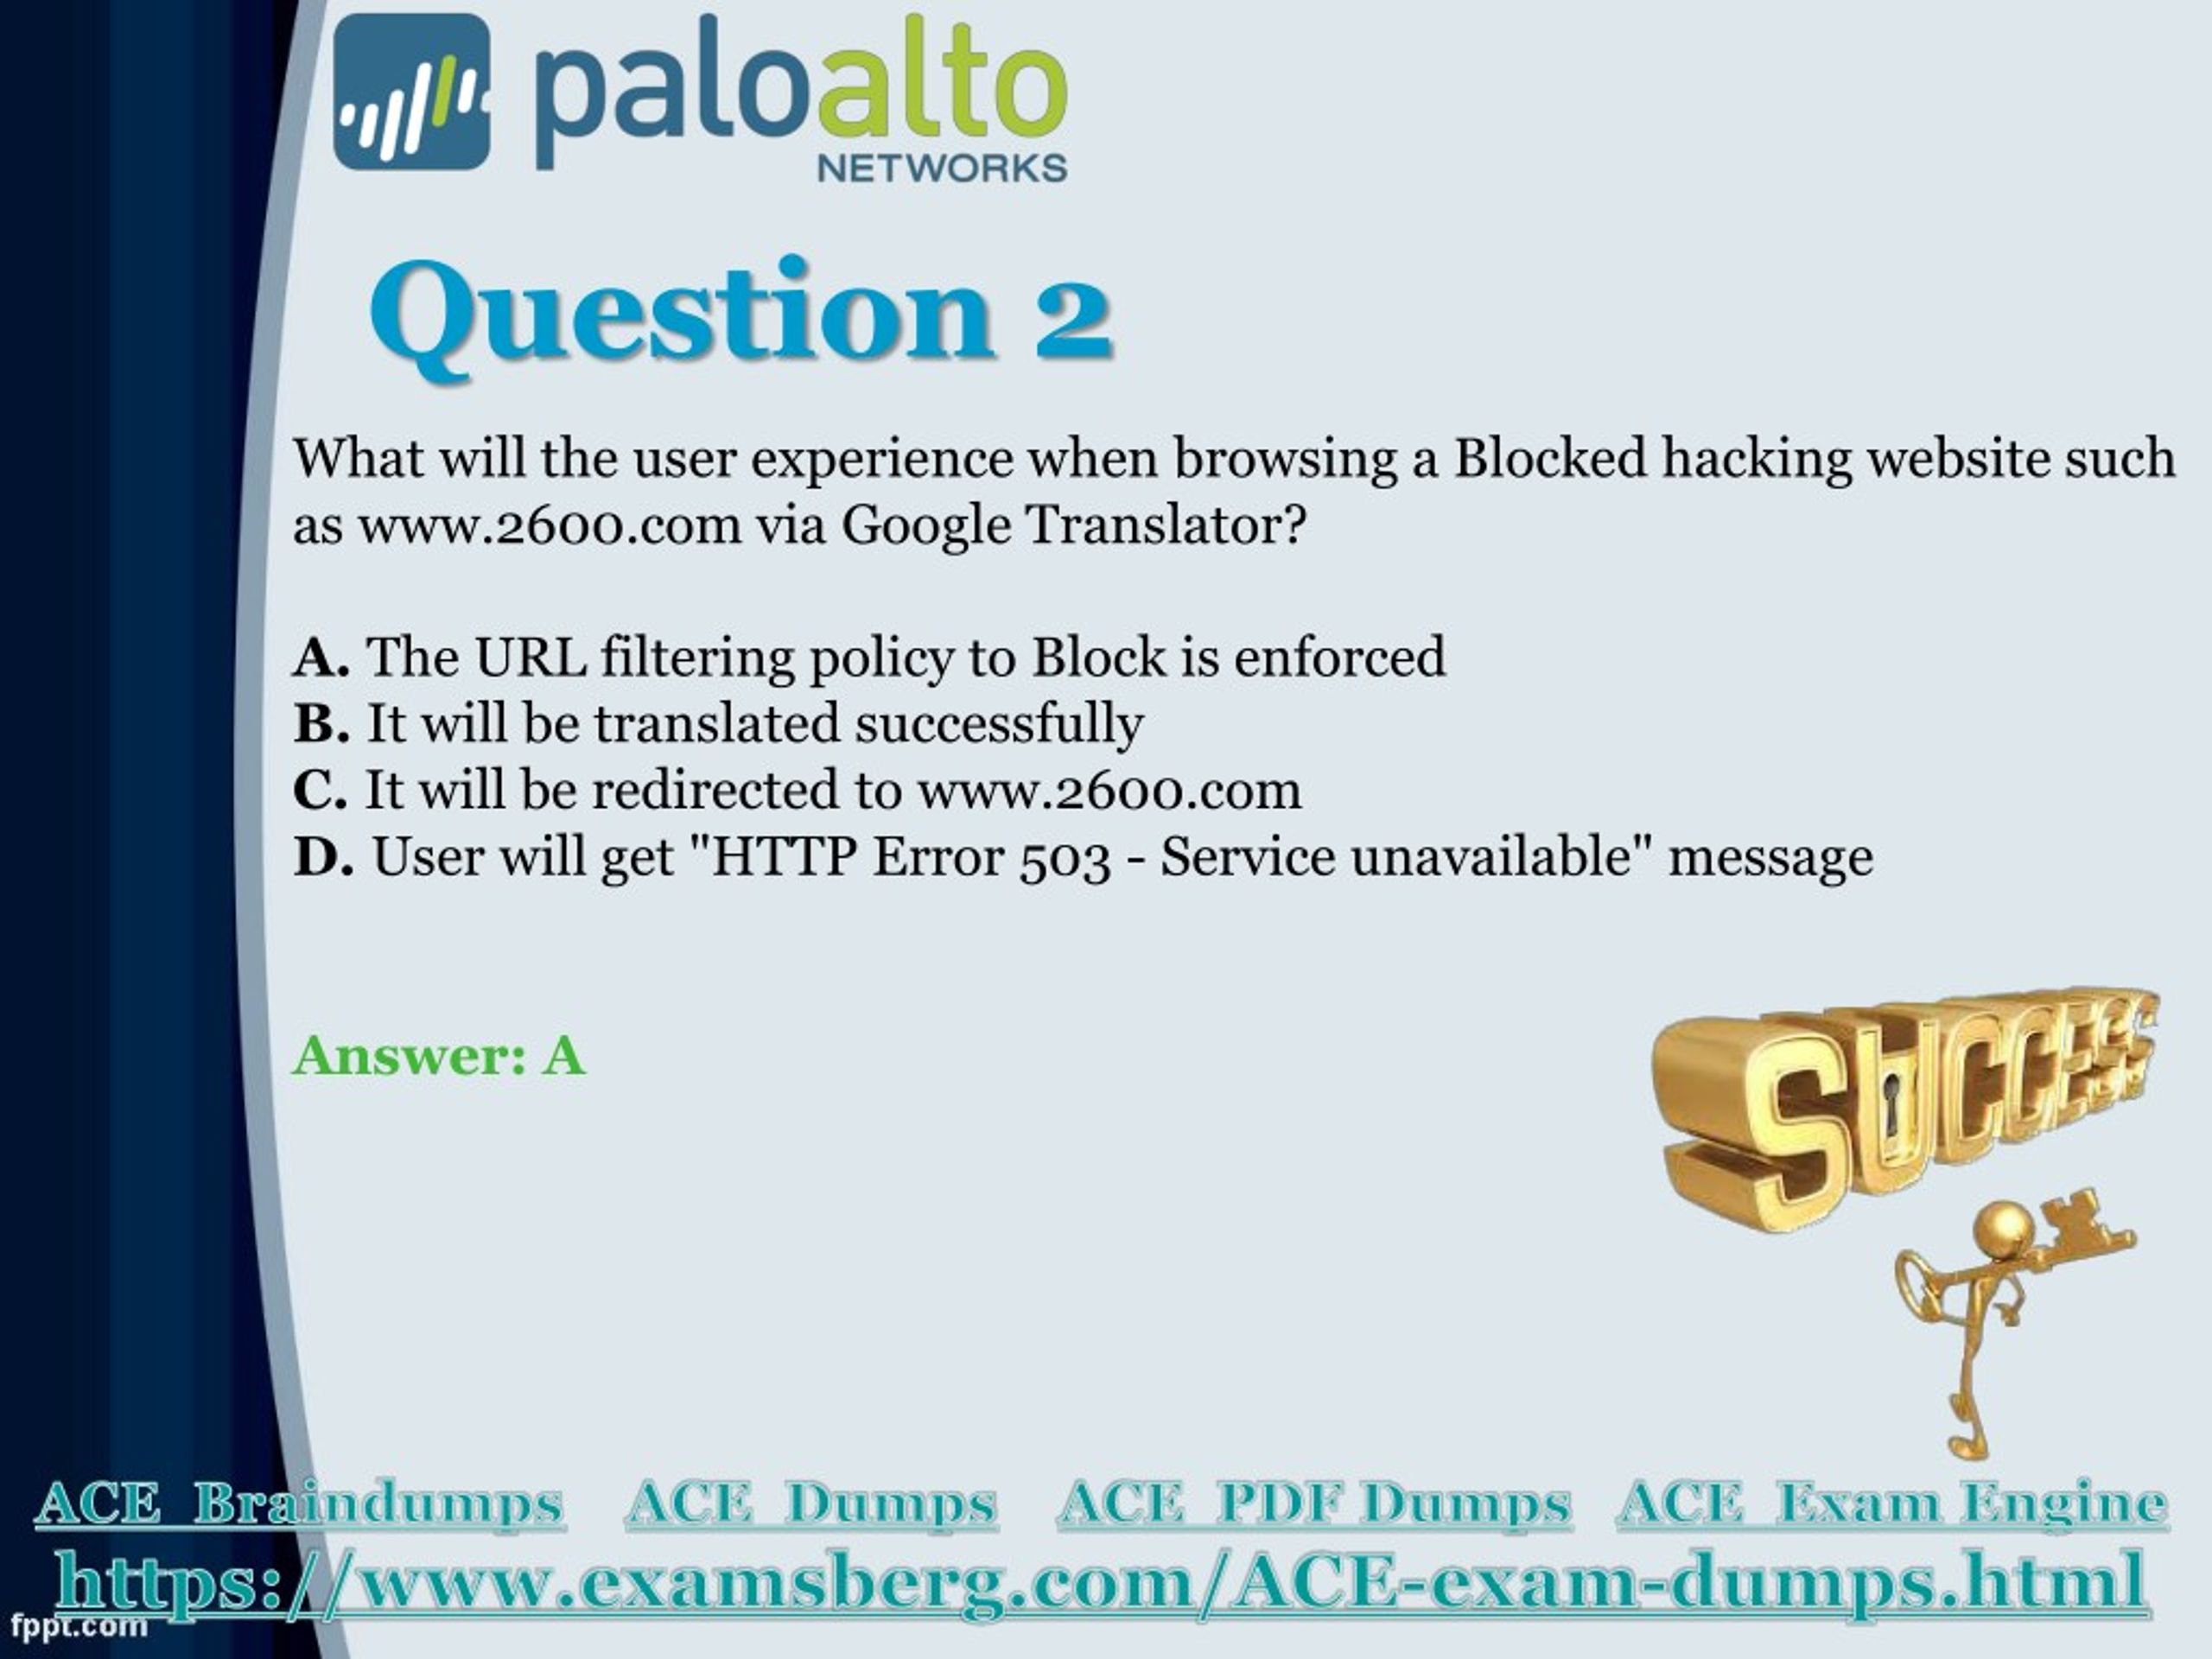 PPT Get Latest Palo Alto Networks ACE Exam Questions PowerPoint Presentation ID7709499